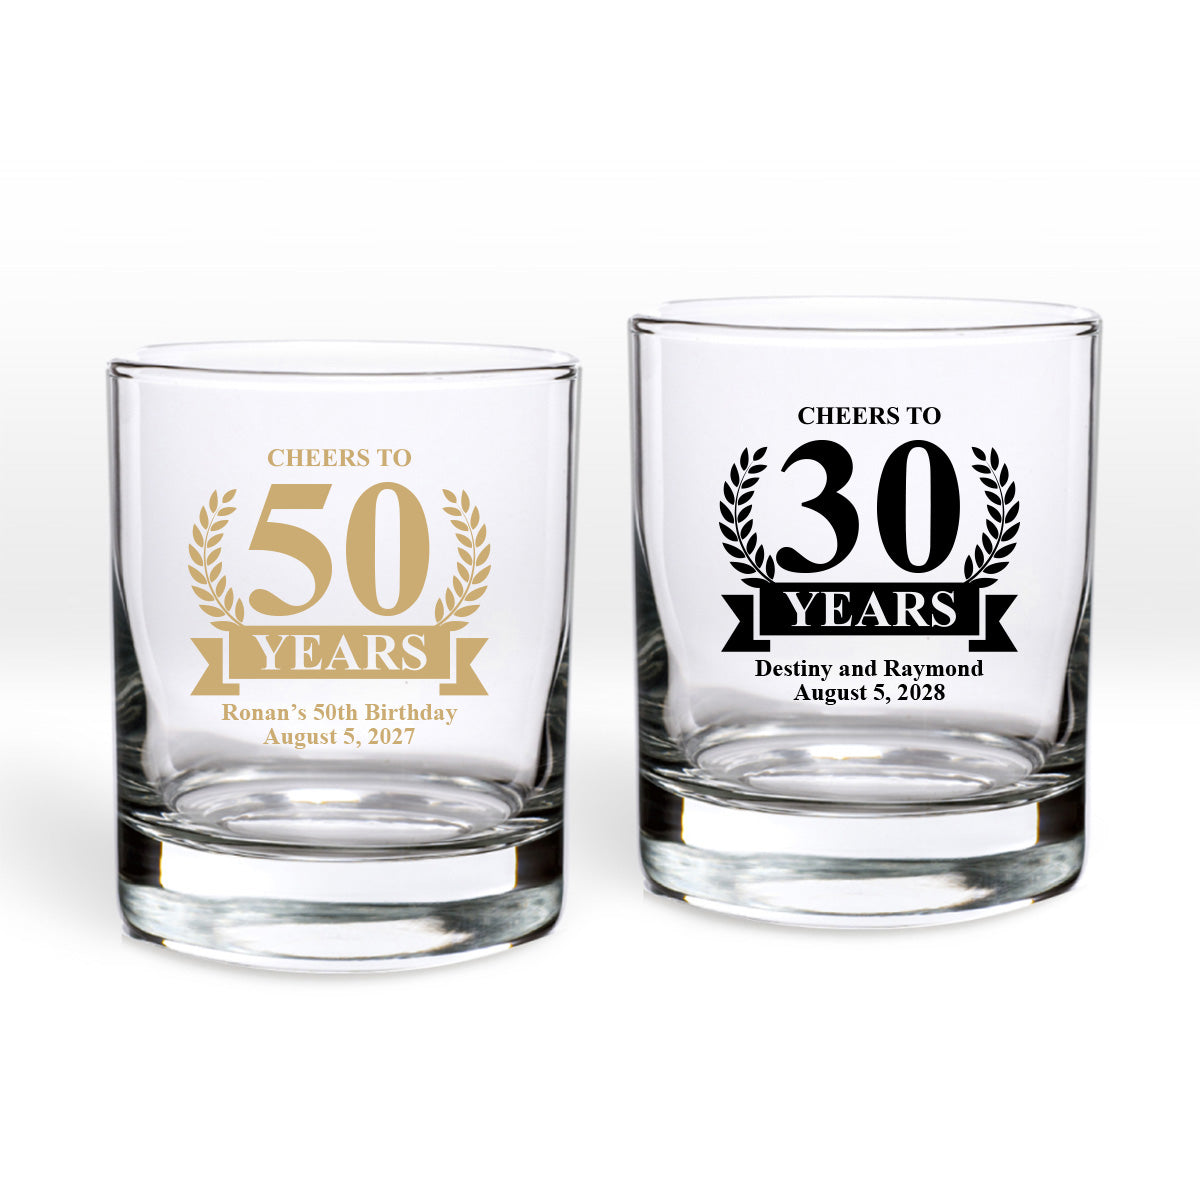 Cheers To 30 Years Personalized Shot Glass or Votive Holder (Set of 24)